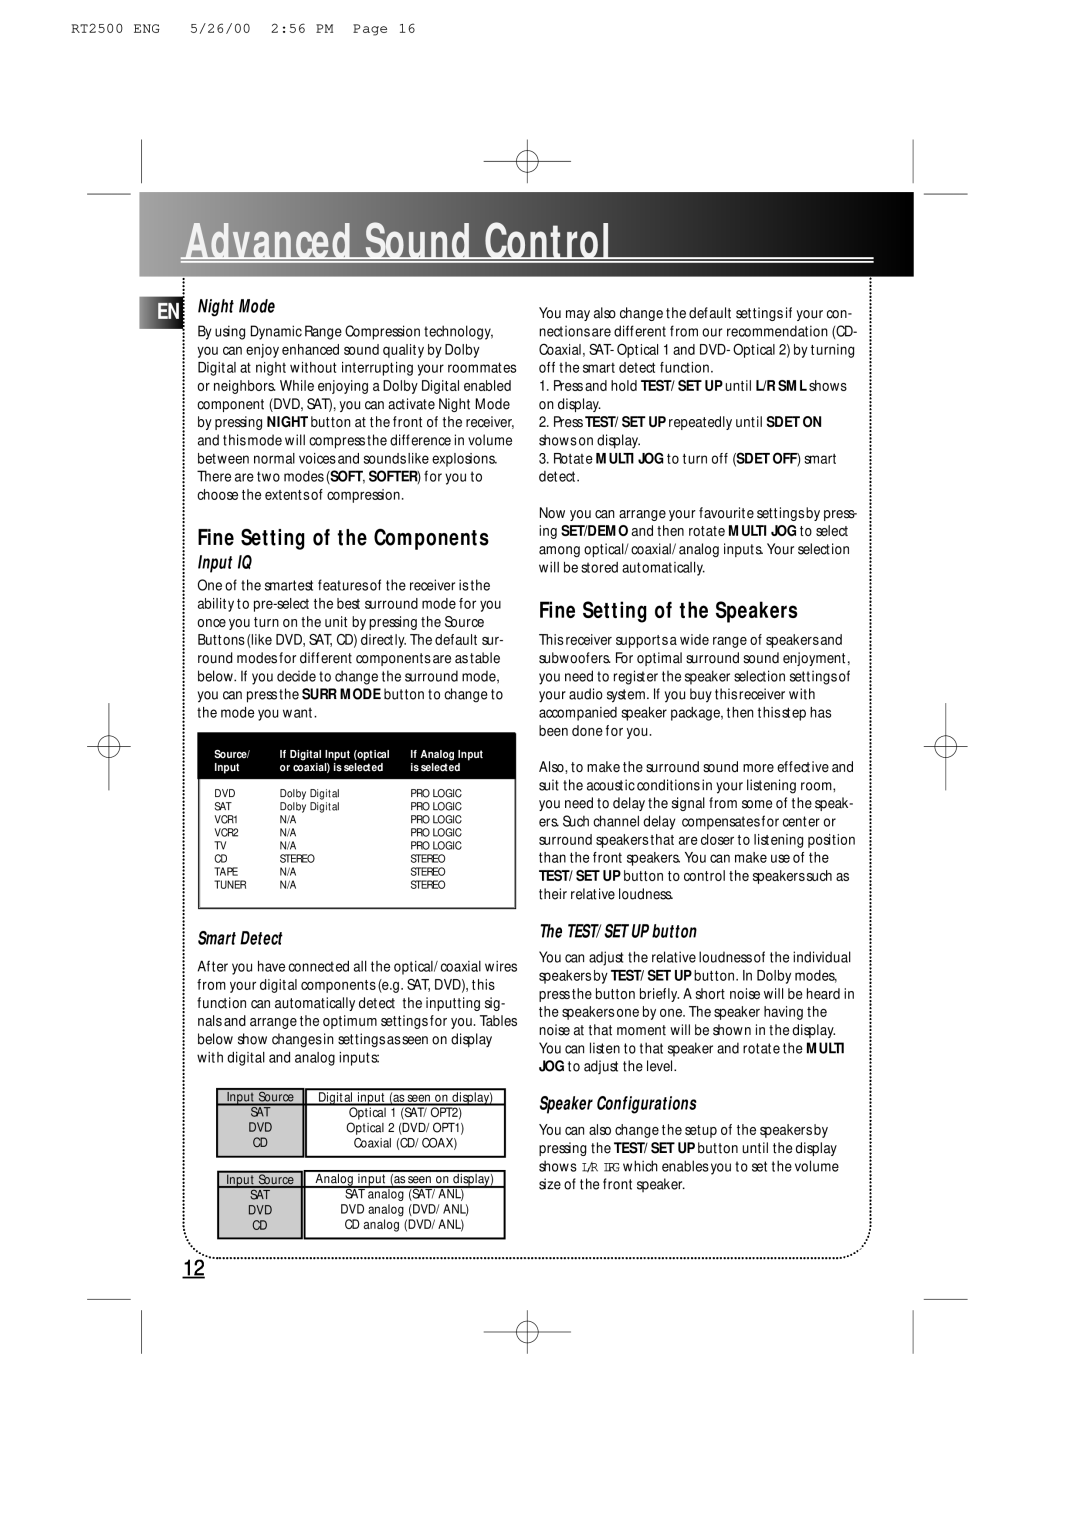 RCA RT2500R user manual Fine Setting of the Components, Fine Setting of the Speakers, EN Night Mode, Input IQ, Smart Detect 